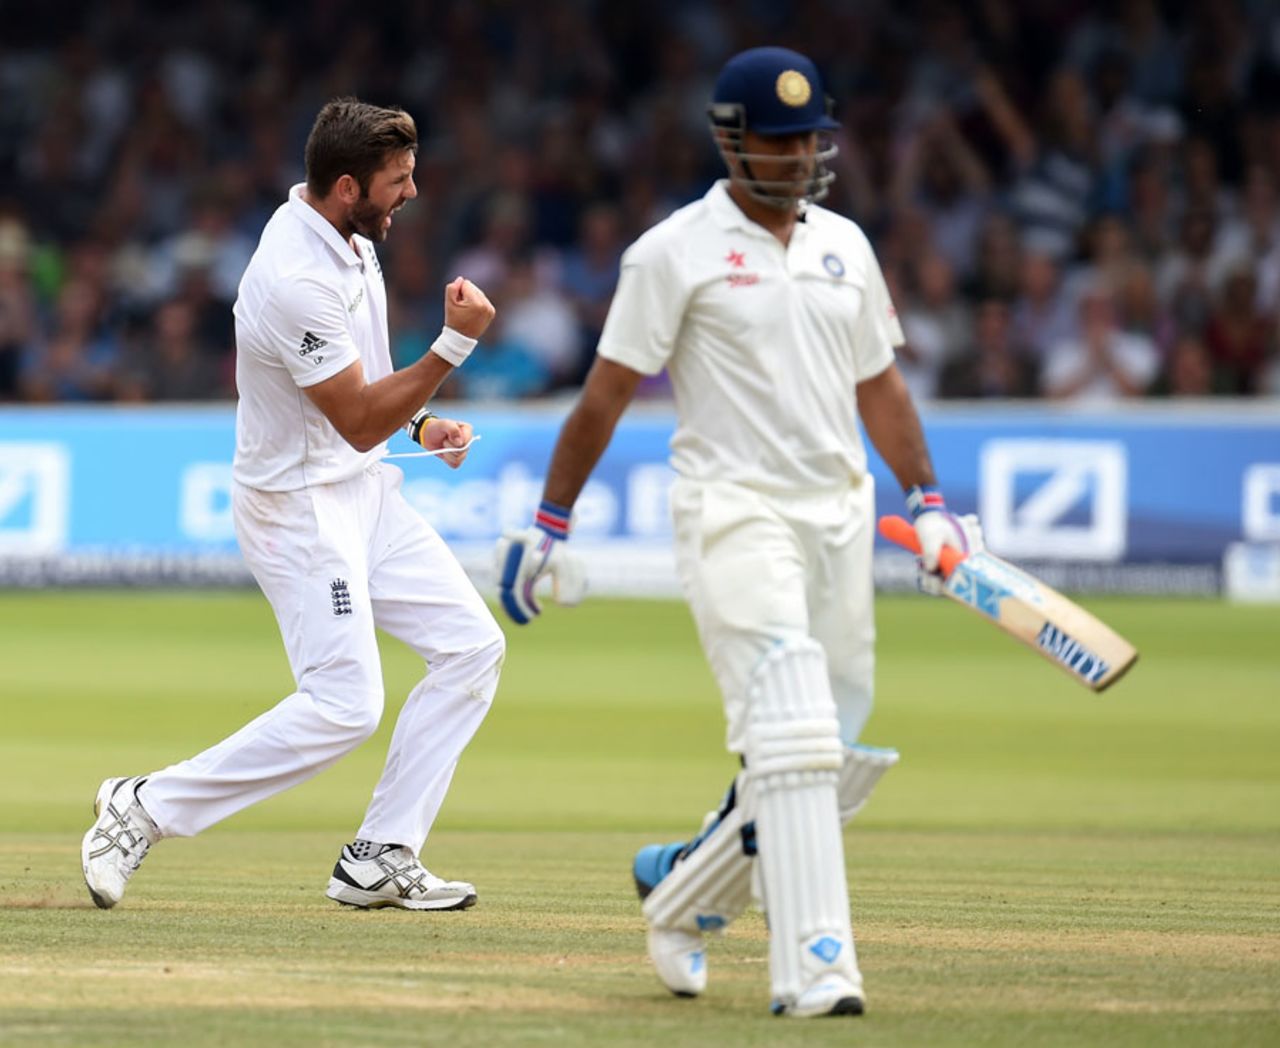 Liam Plunkett is overjoyed after dismissing MS Dhoni, England v India, 2nd Investec Test, Lord's, 4th day, July 20, 2014